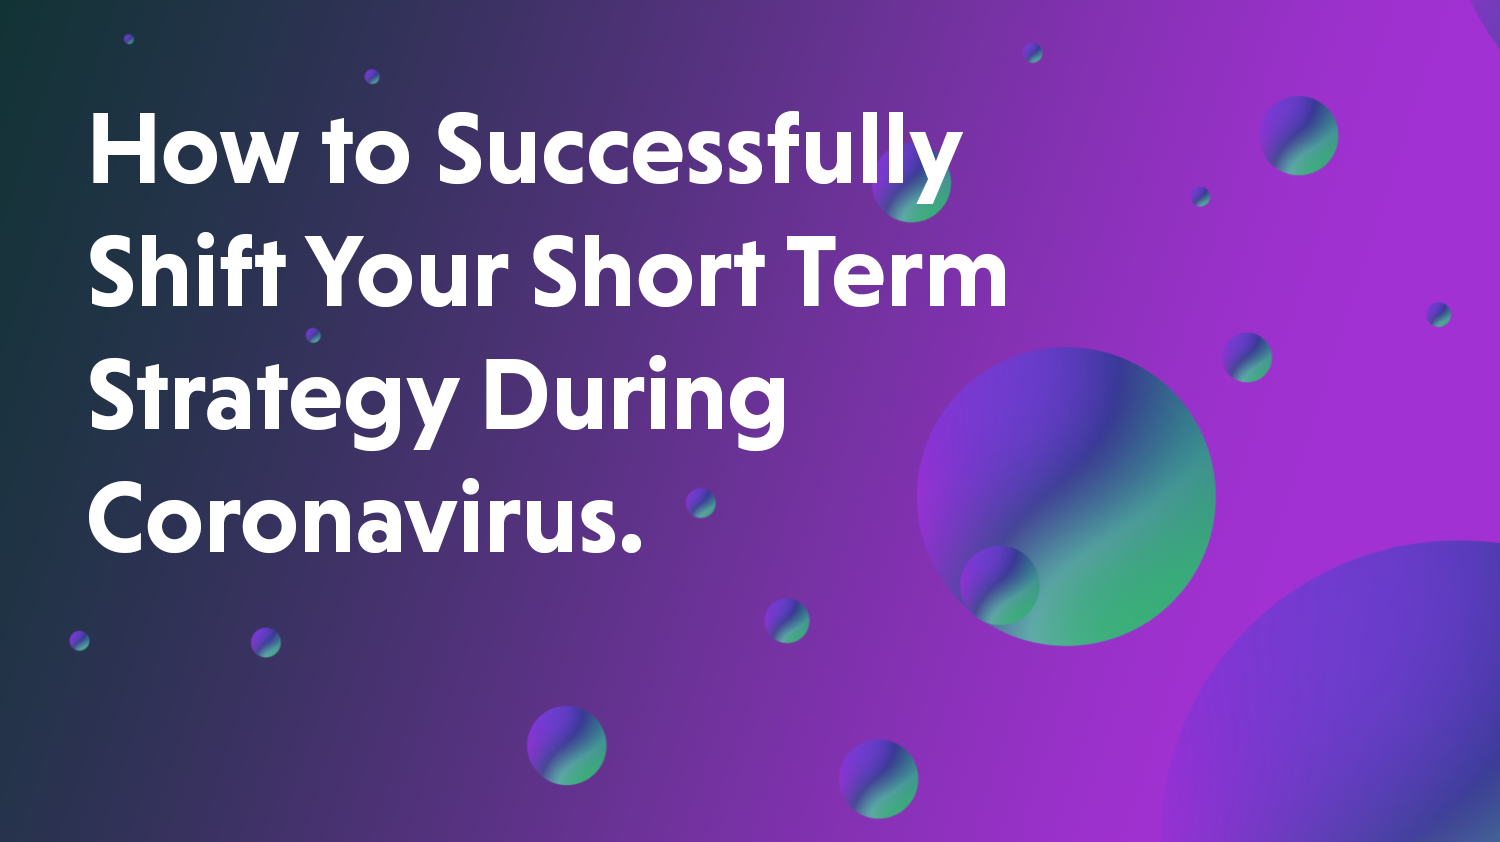 How to Successfully Shift Your Short Term Strategy During Coronavirus